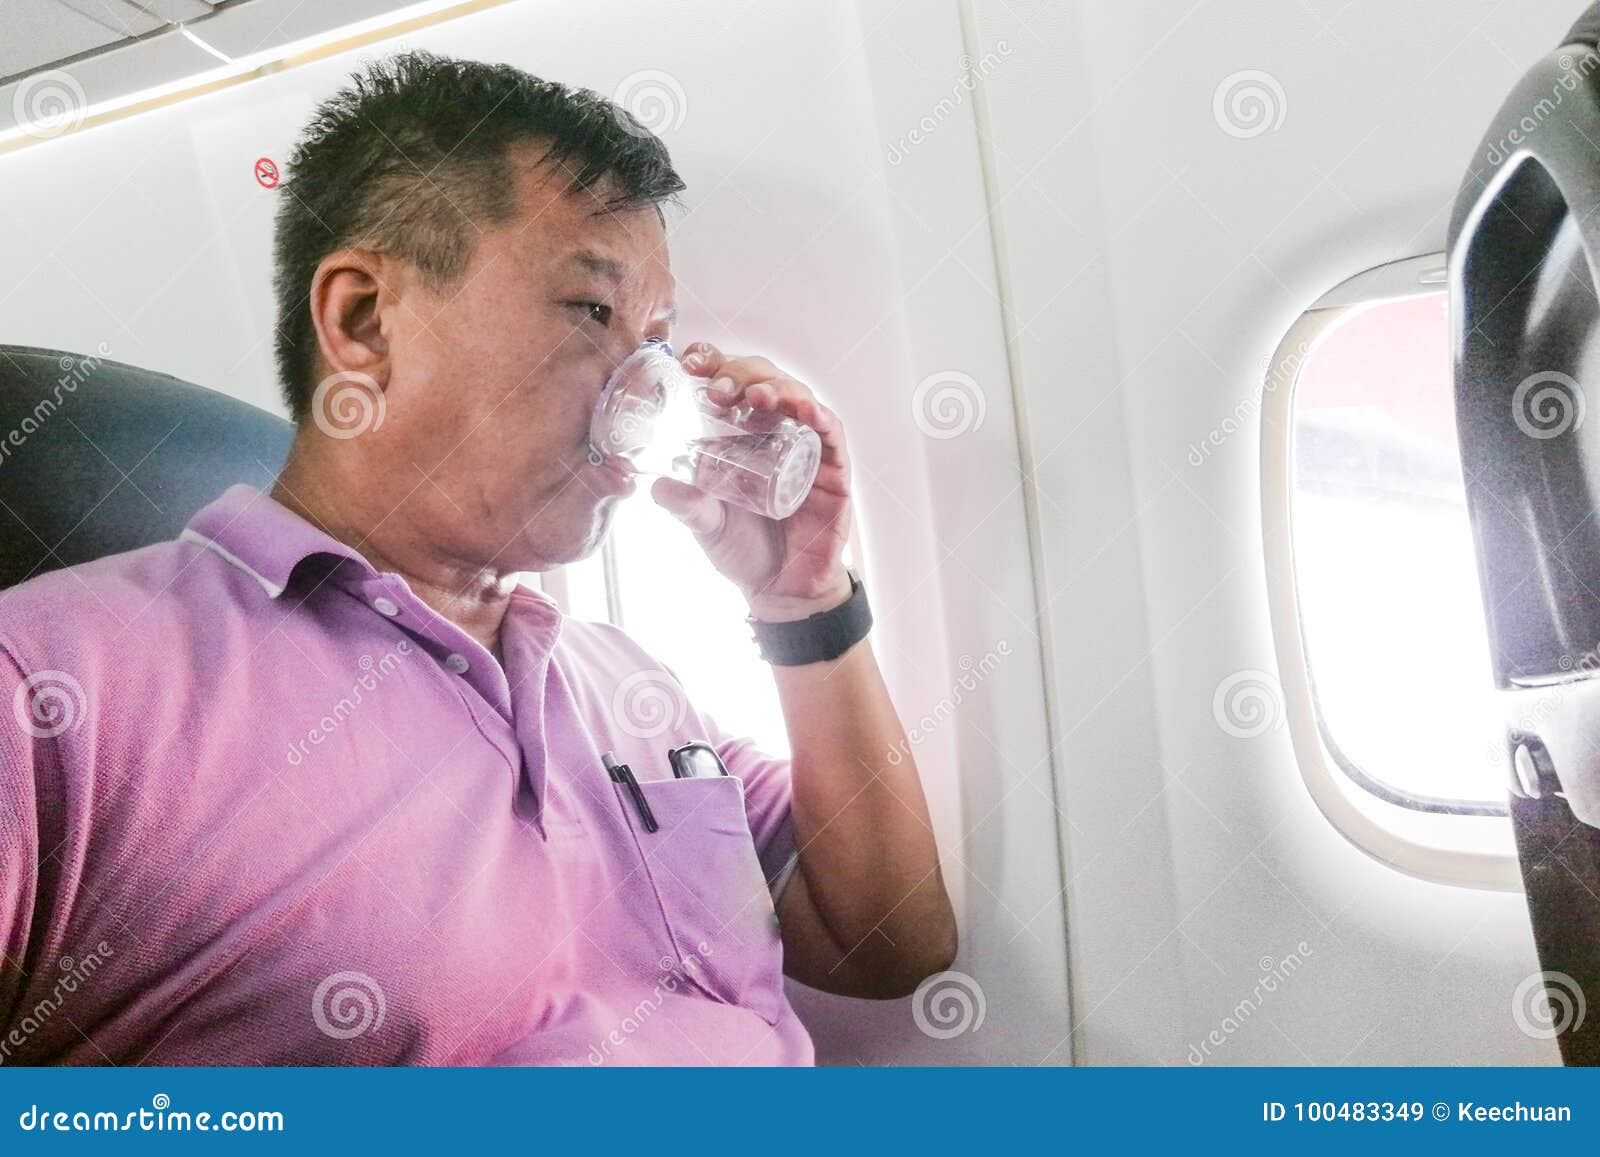 person drinking water in airplane long haul flight to hydrate